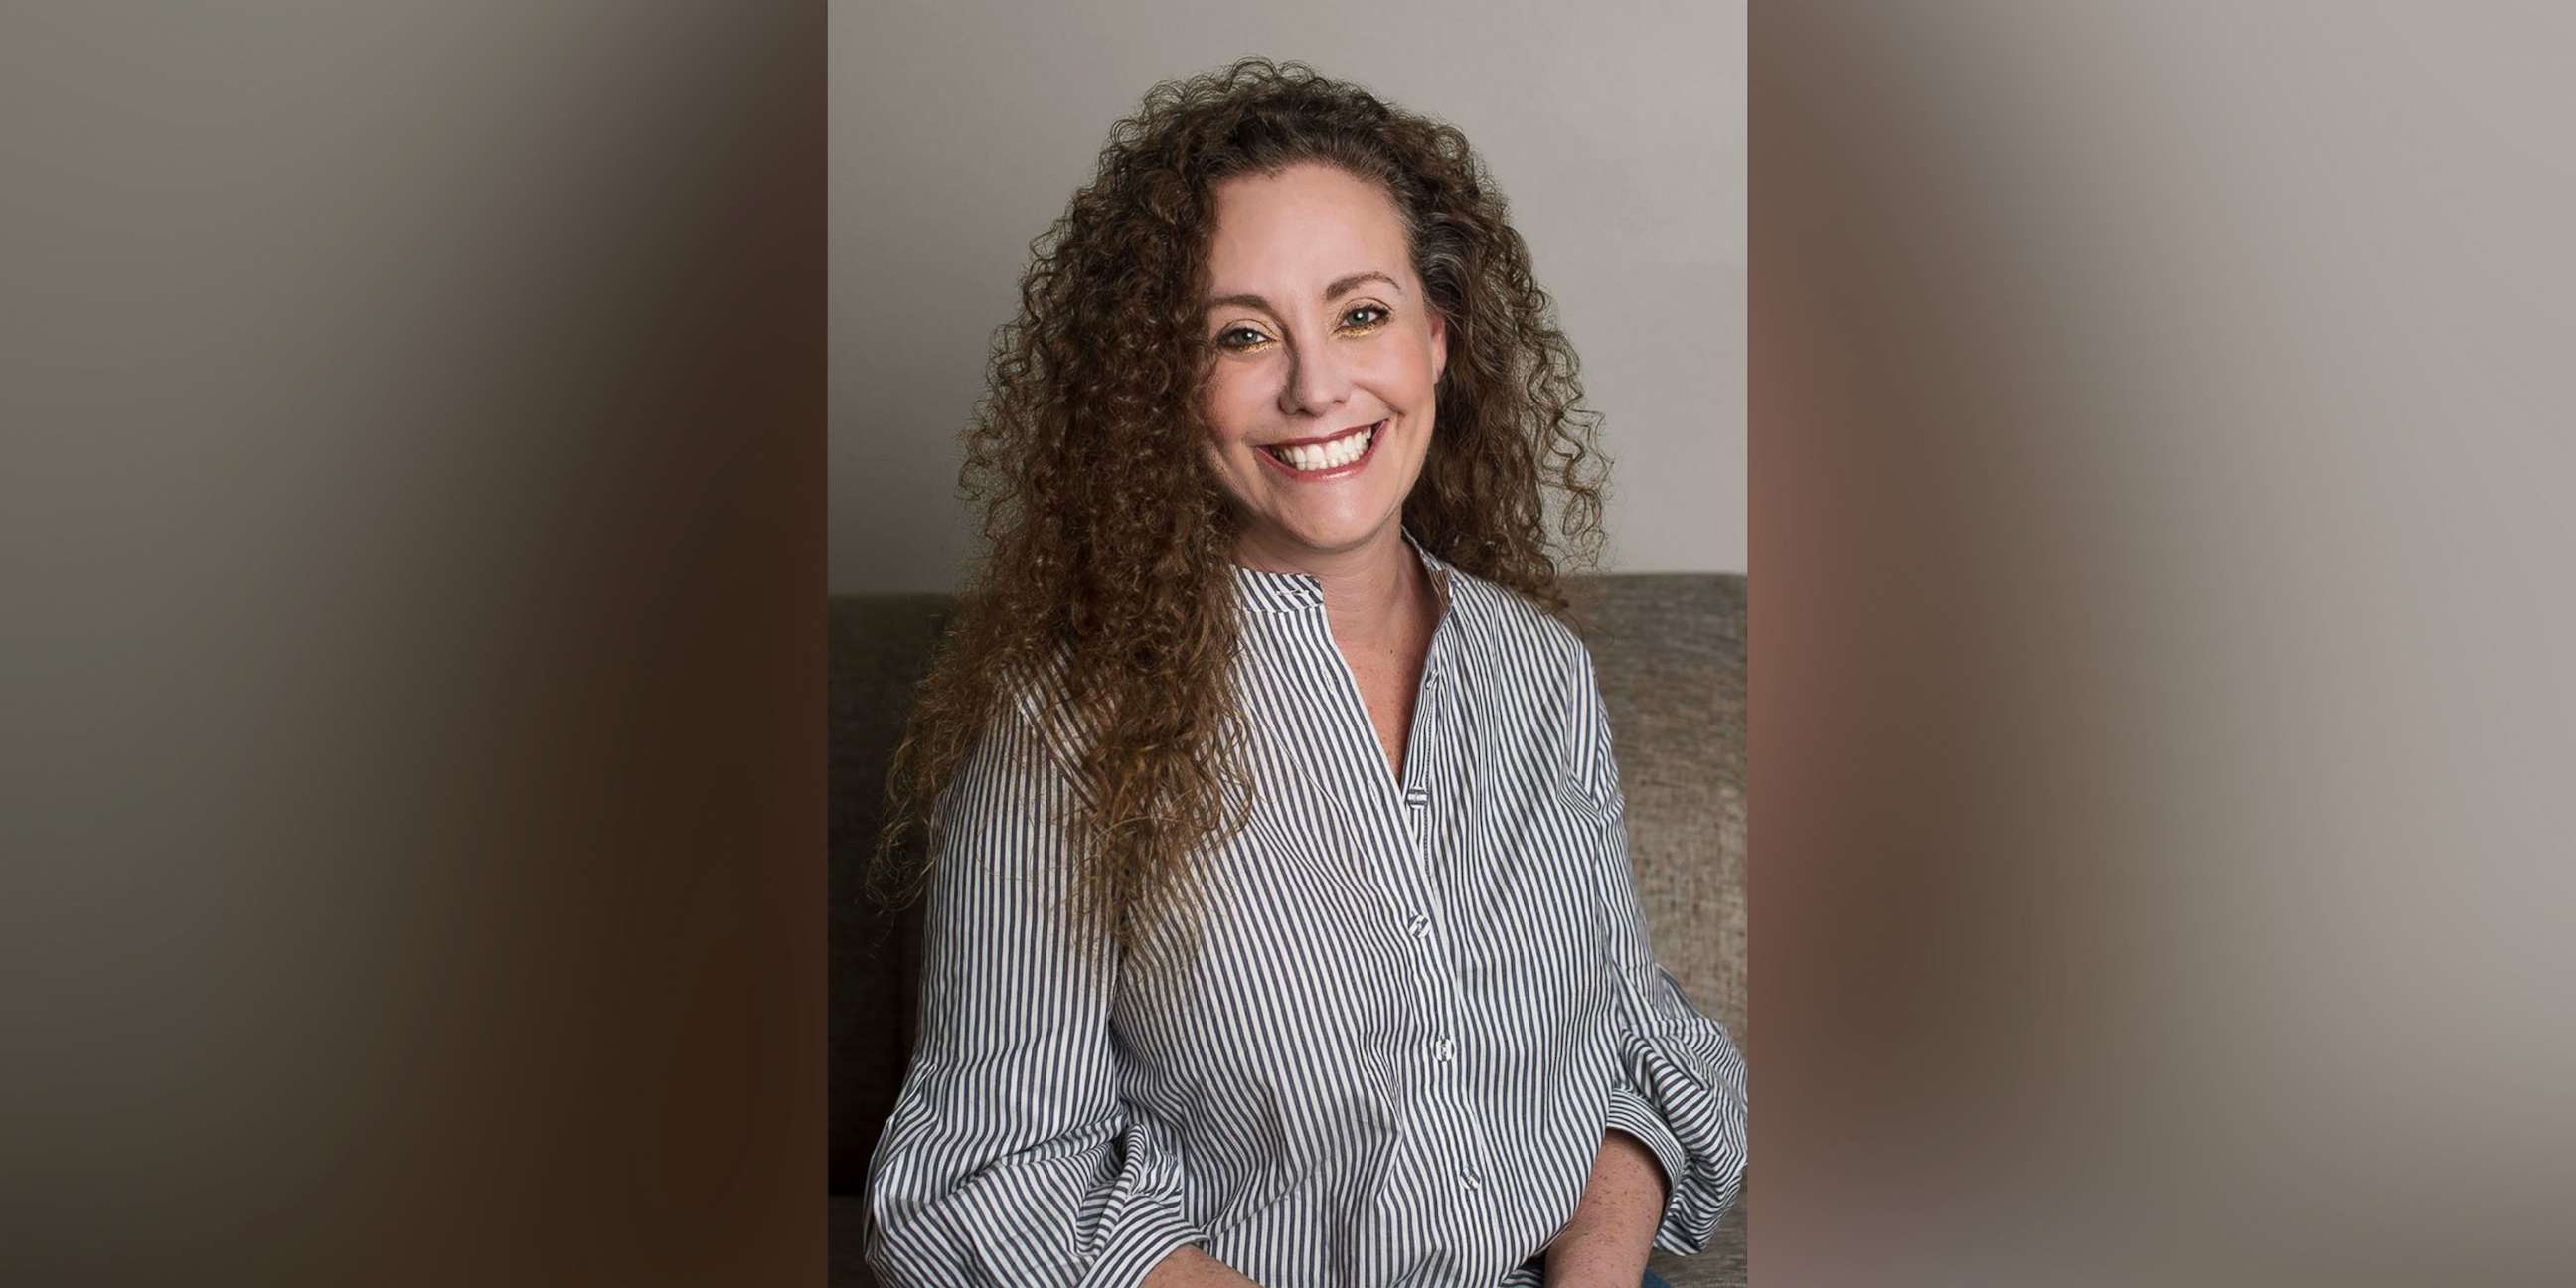 PHOTO: A photo posted to Twitter by lawyer Michael Avenatti that he identified as his client, Julie Swetnick, who has new allegations against Supreme Court nominee Brett Kavanaugh.